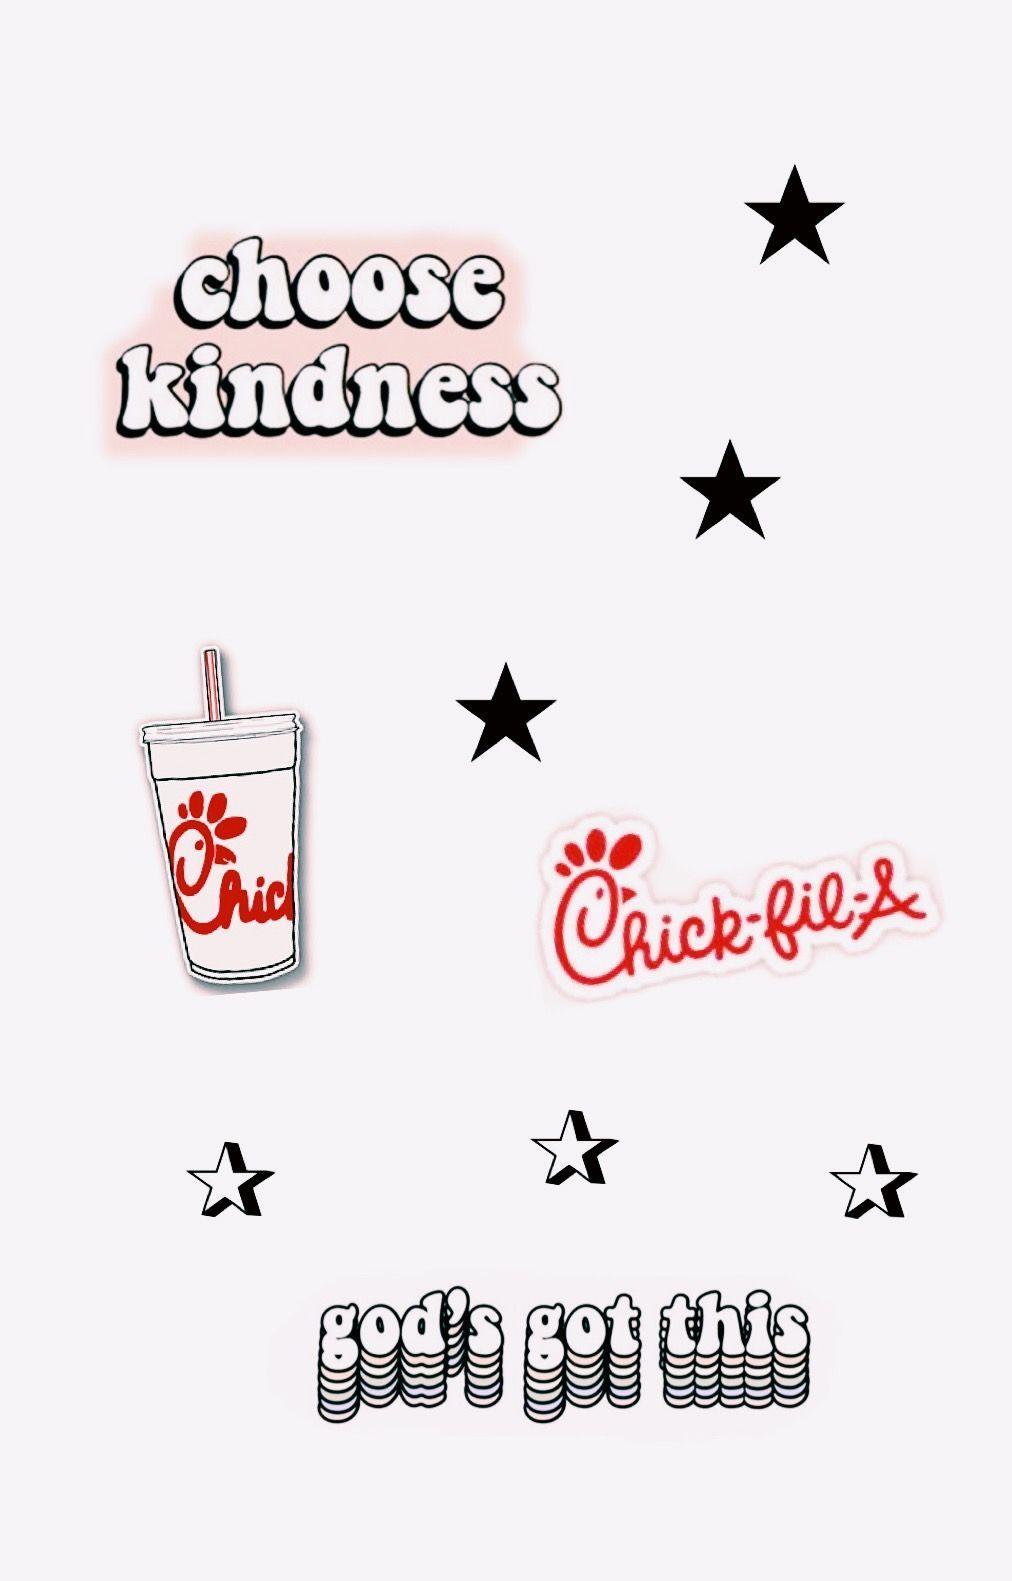 Download Aesthetic Chick Fil A Signage Wallpaper  Wallpaperscom